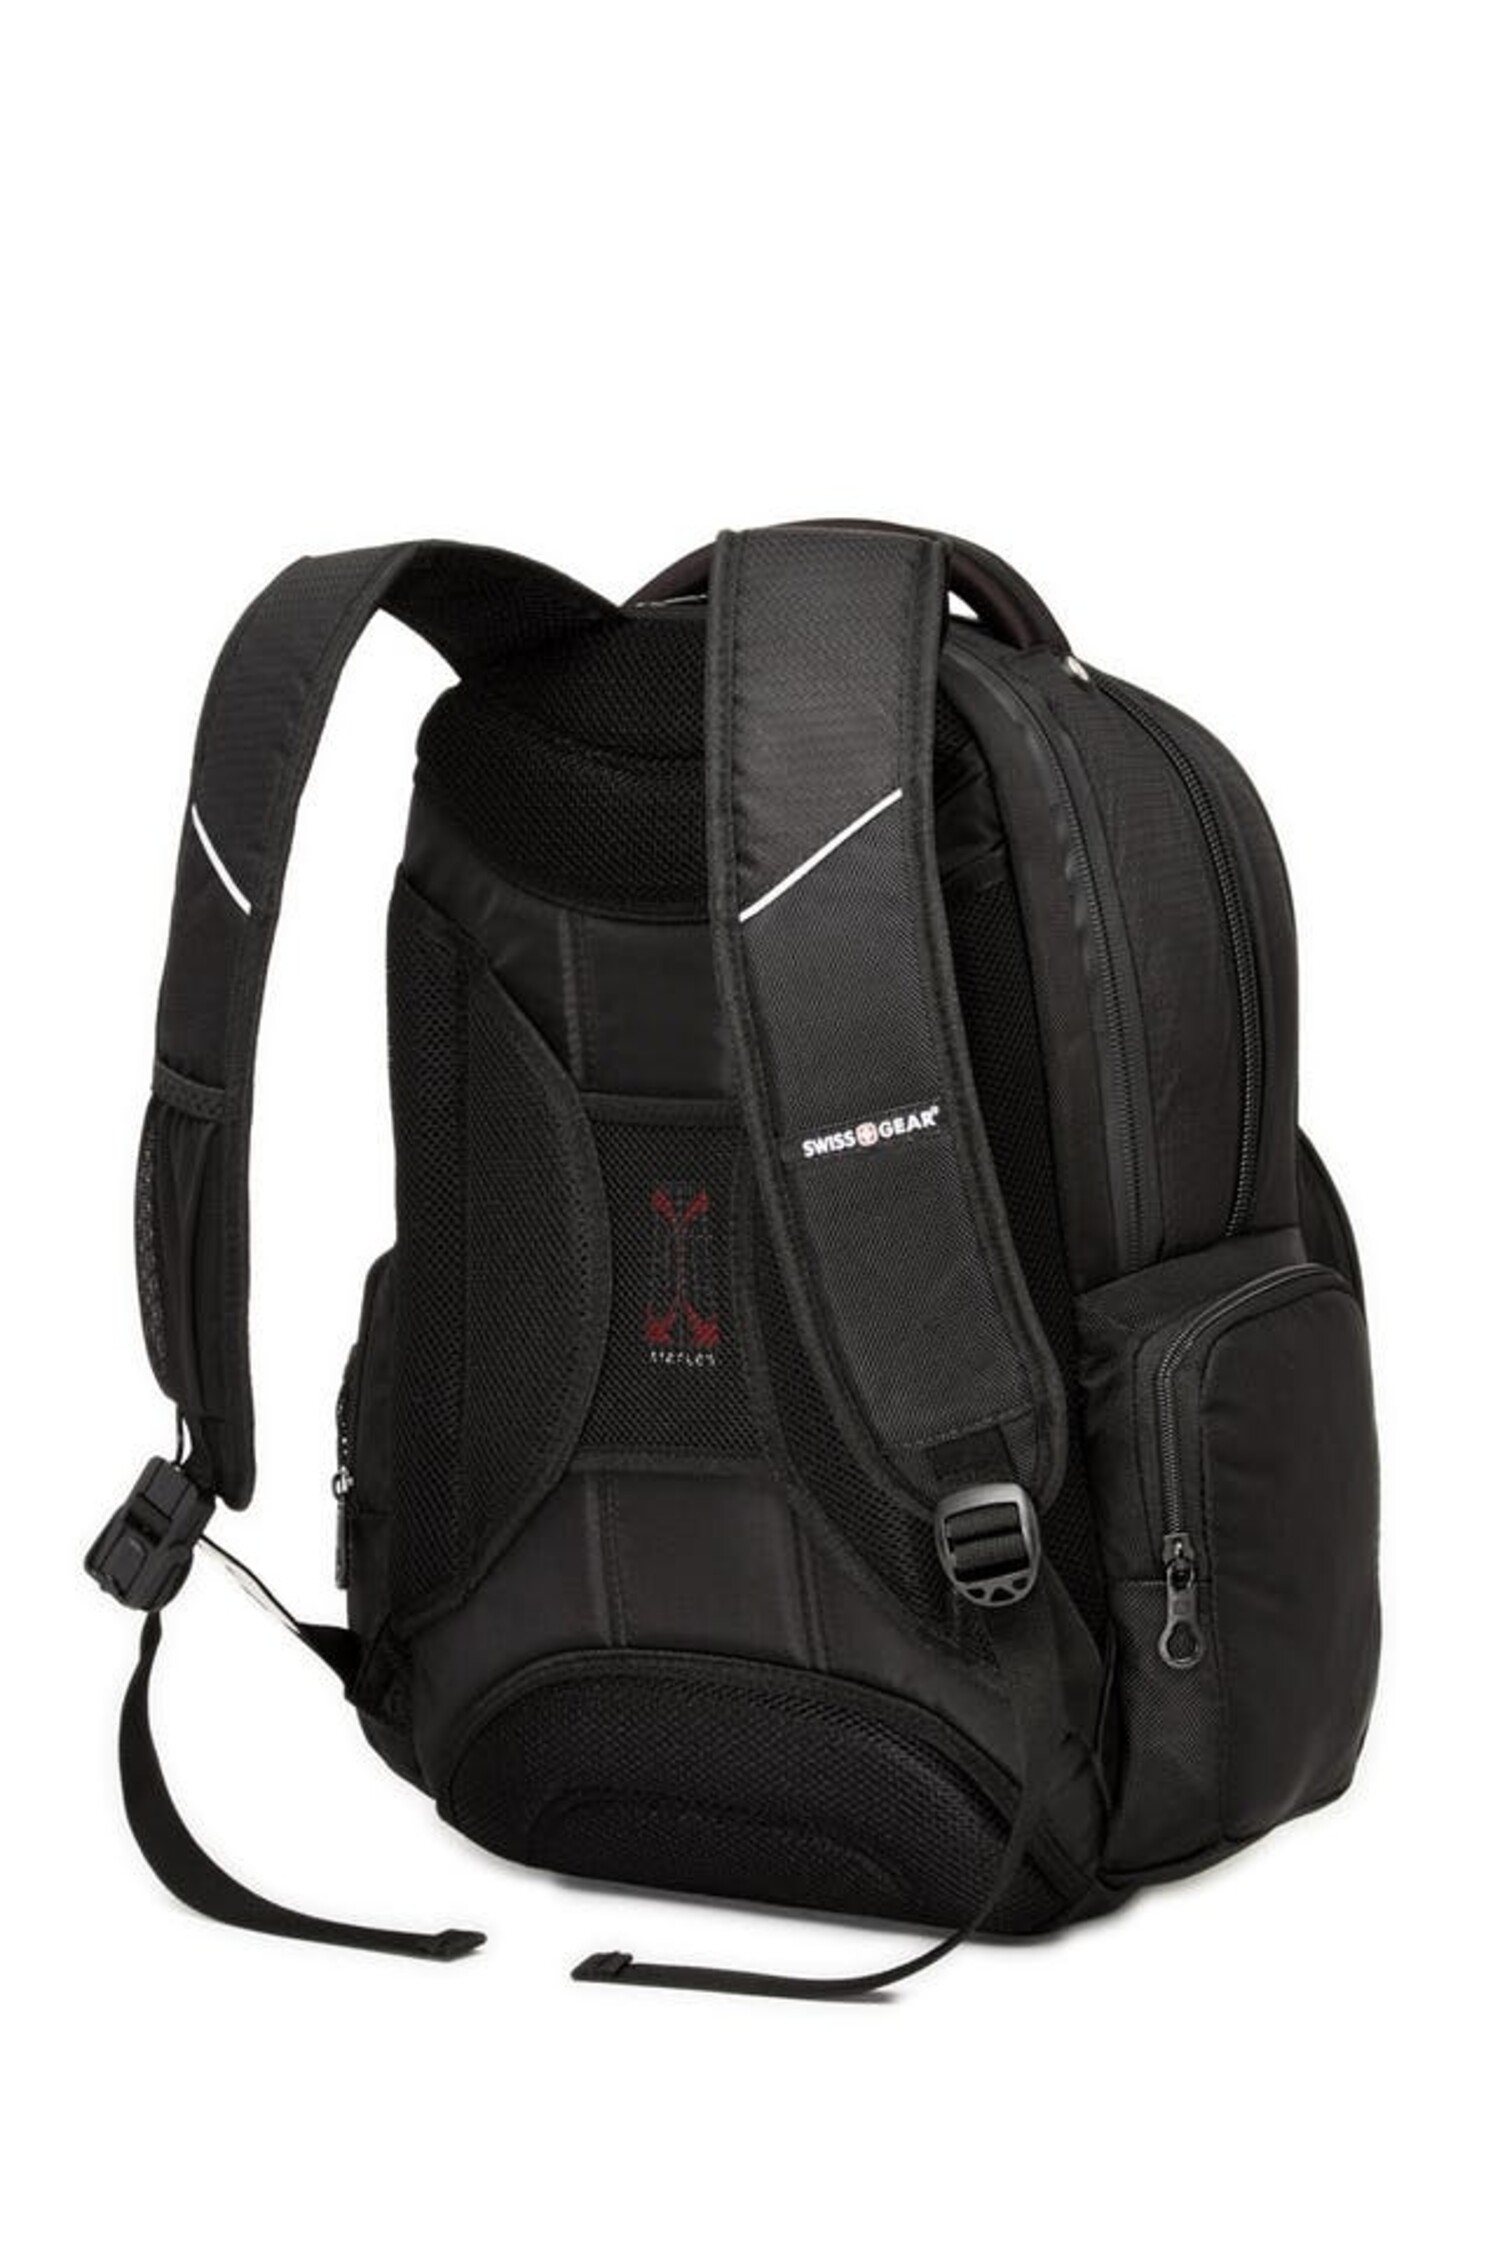 Swiss Gear 9960 Laptop Backpack- Black - Just Bags Luggage Center